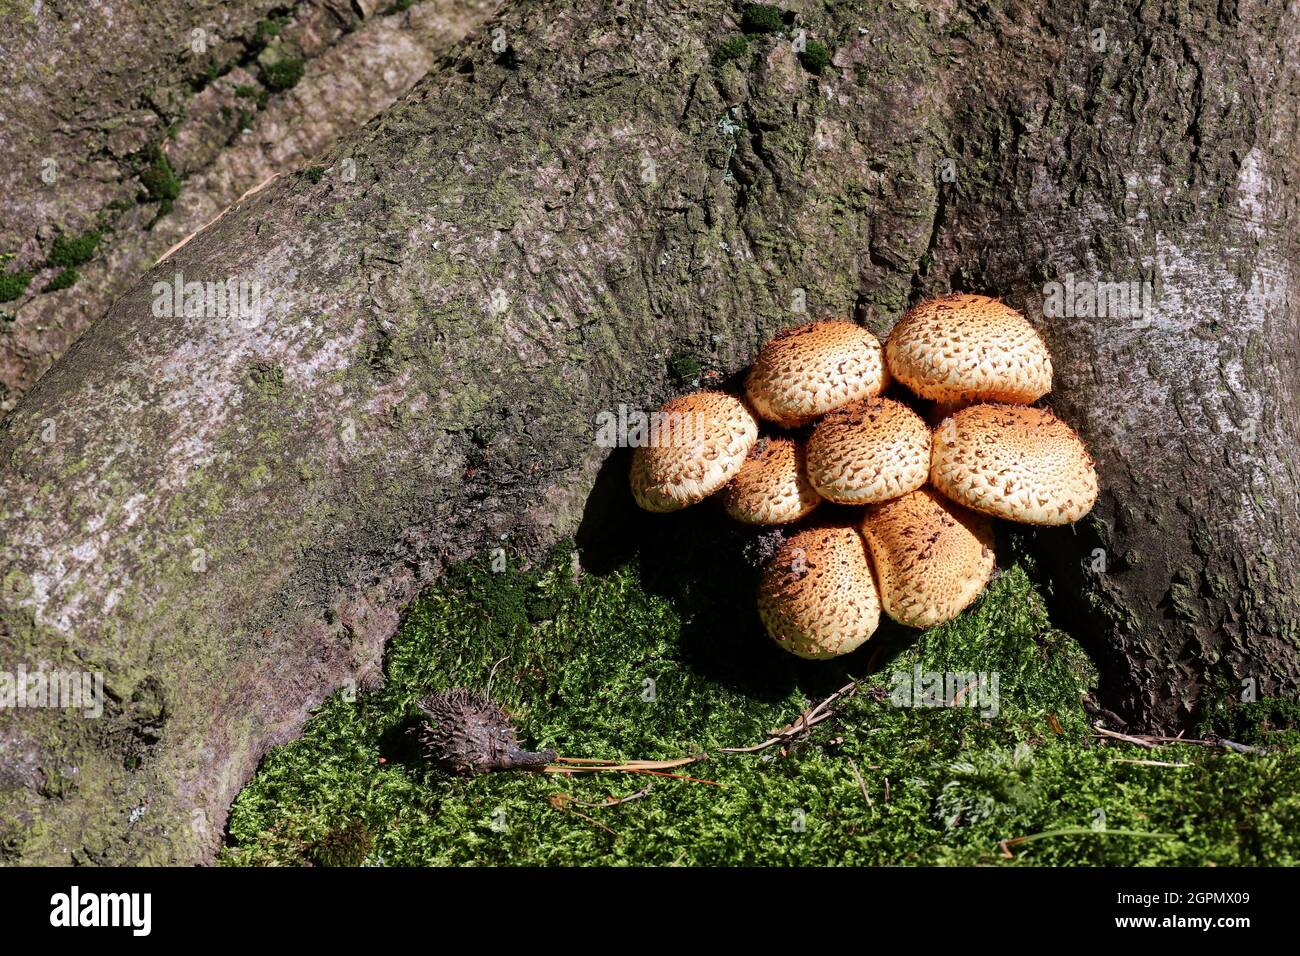 Pholiota squarrosa, commonly known as the shaggy scalycap, is not very good mushroom, can be confused with honey mushroom Stock Photo